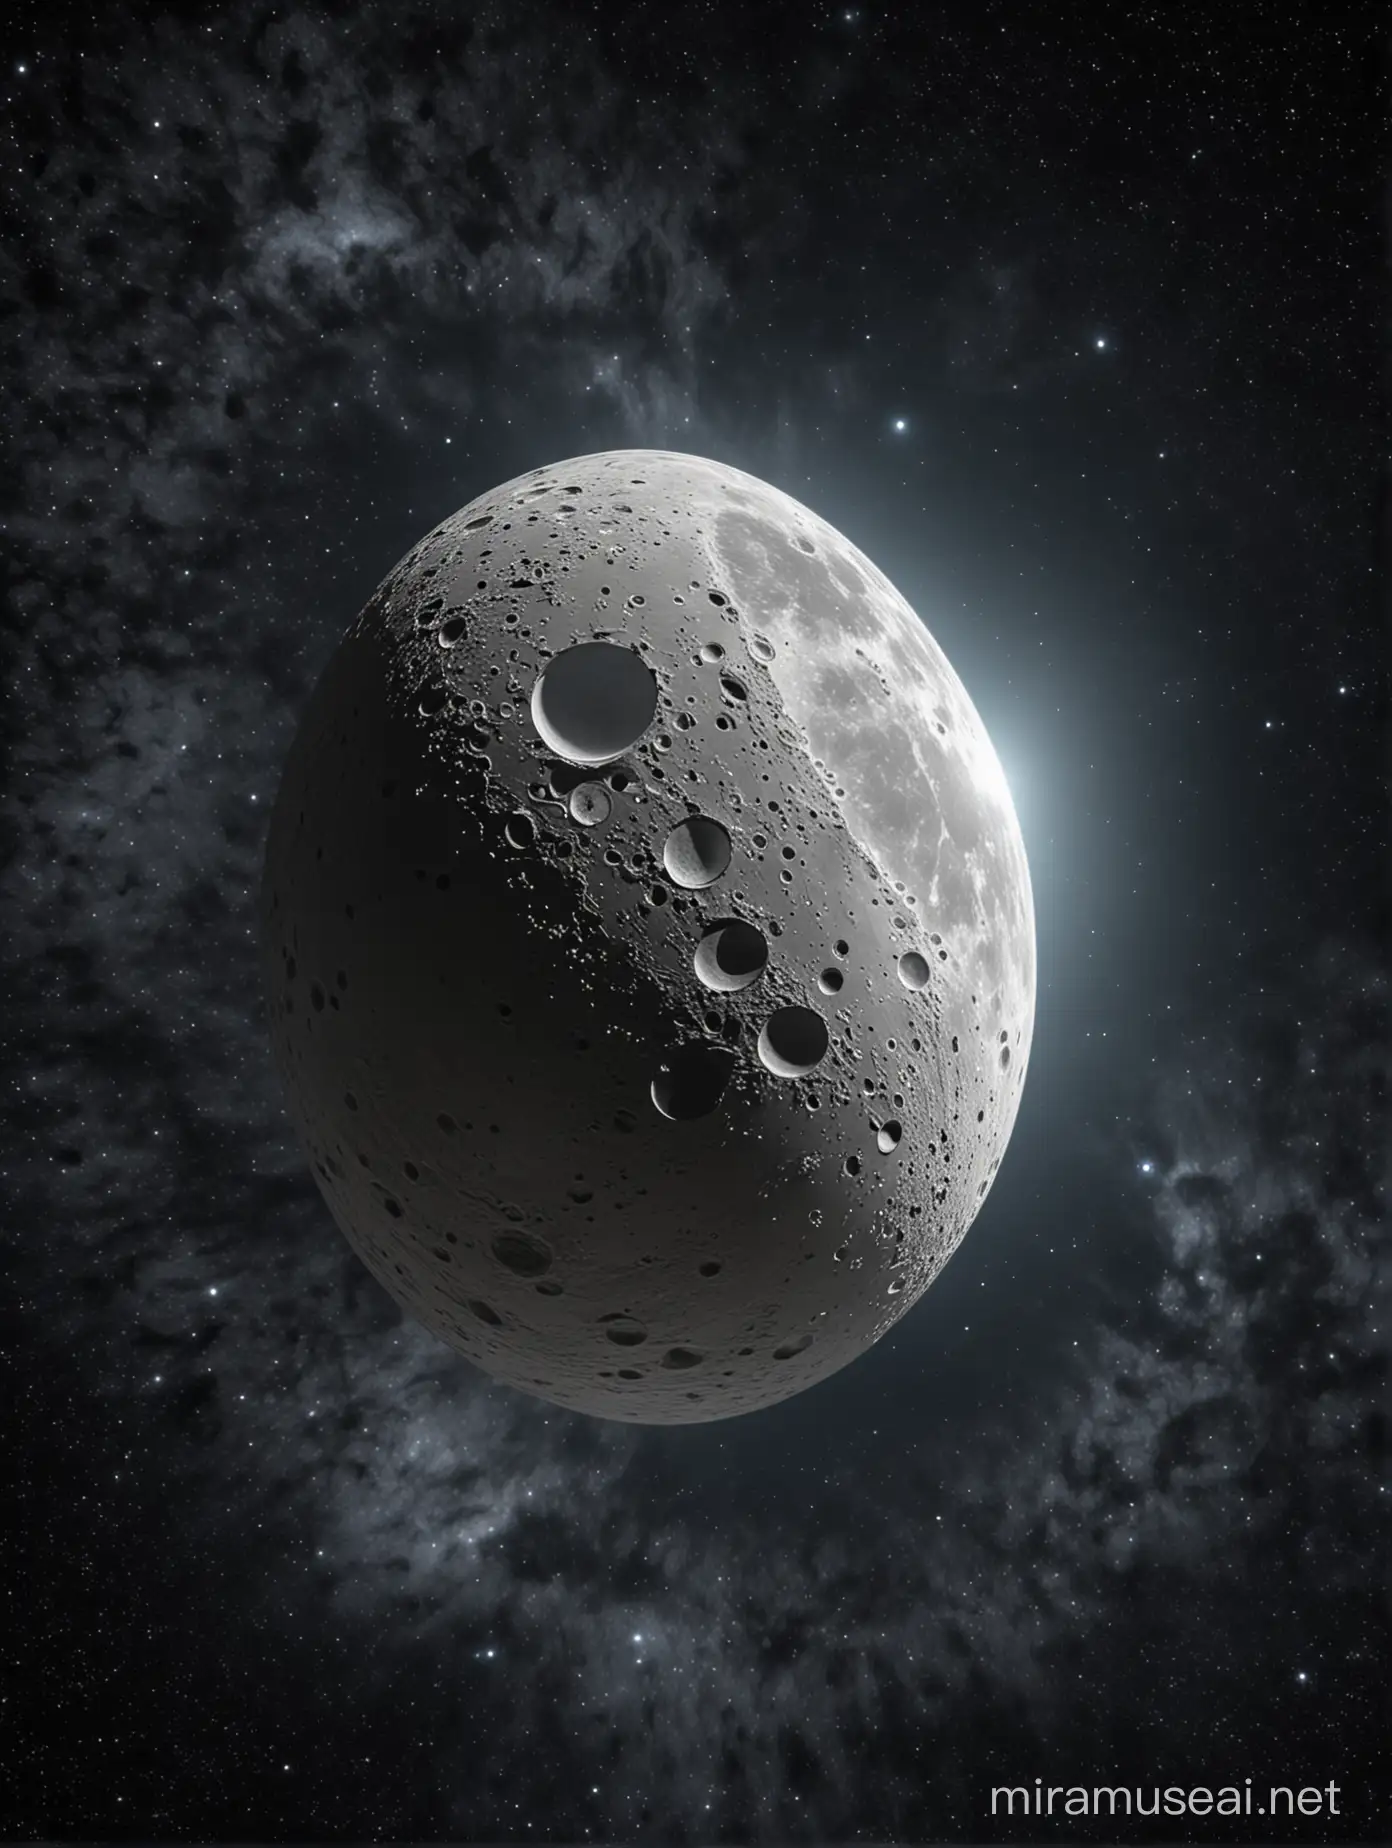 EggShaped Moon in 4K Realistic HD Space Photo with Starry Background